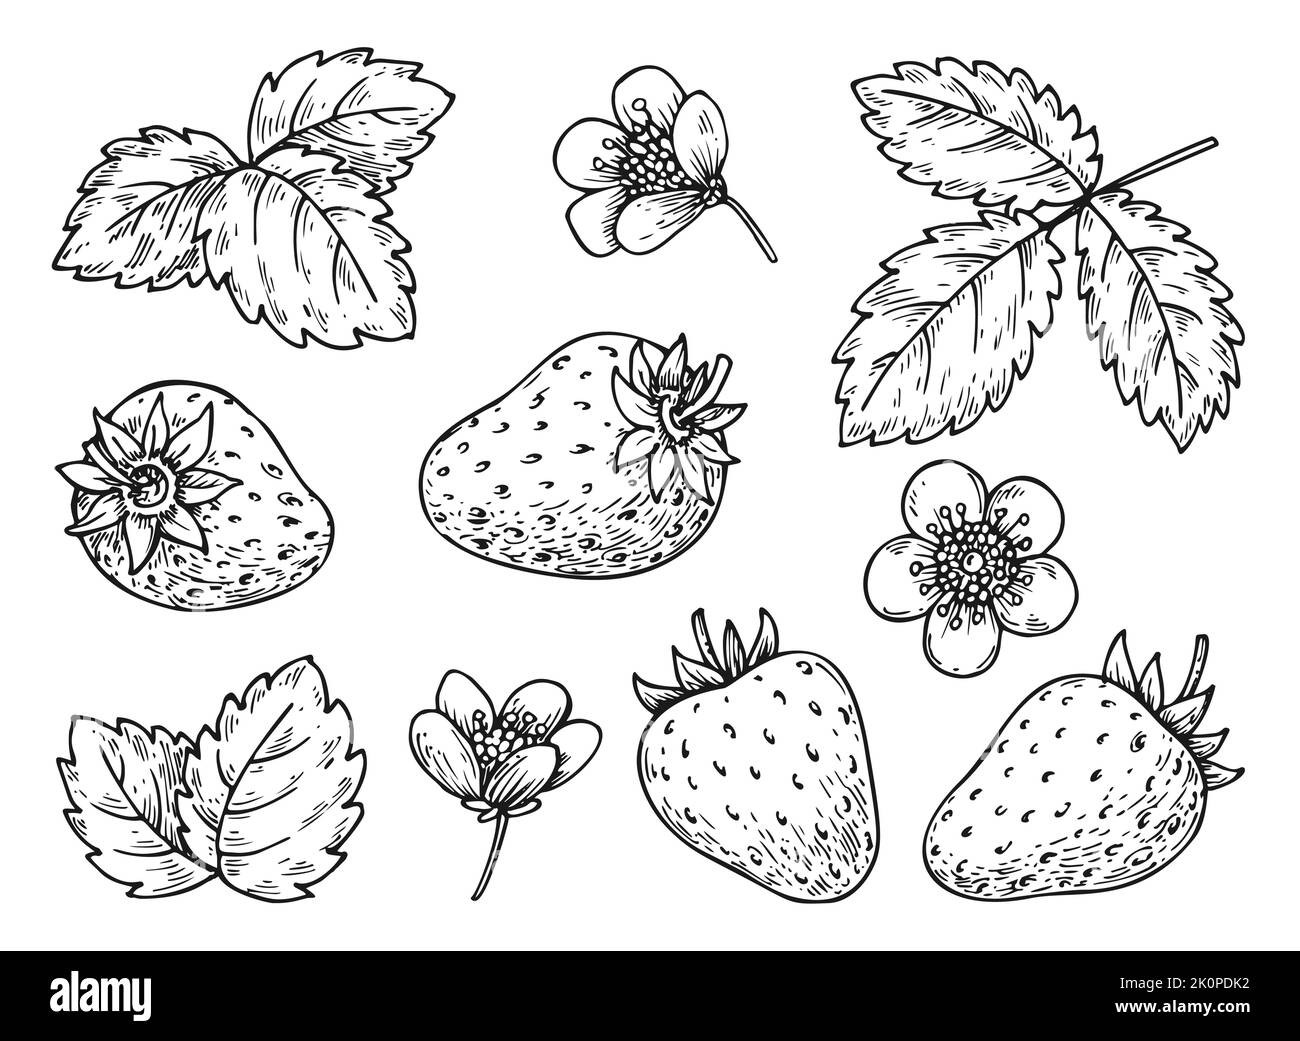 Page 2  Strawberry Tattoo Images  Free Download on Freepik